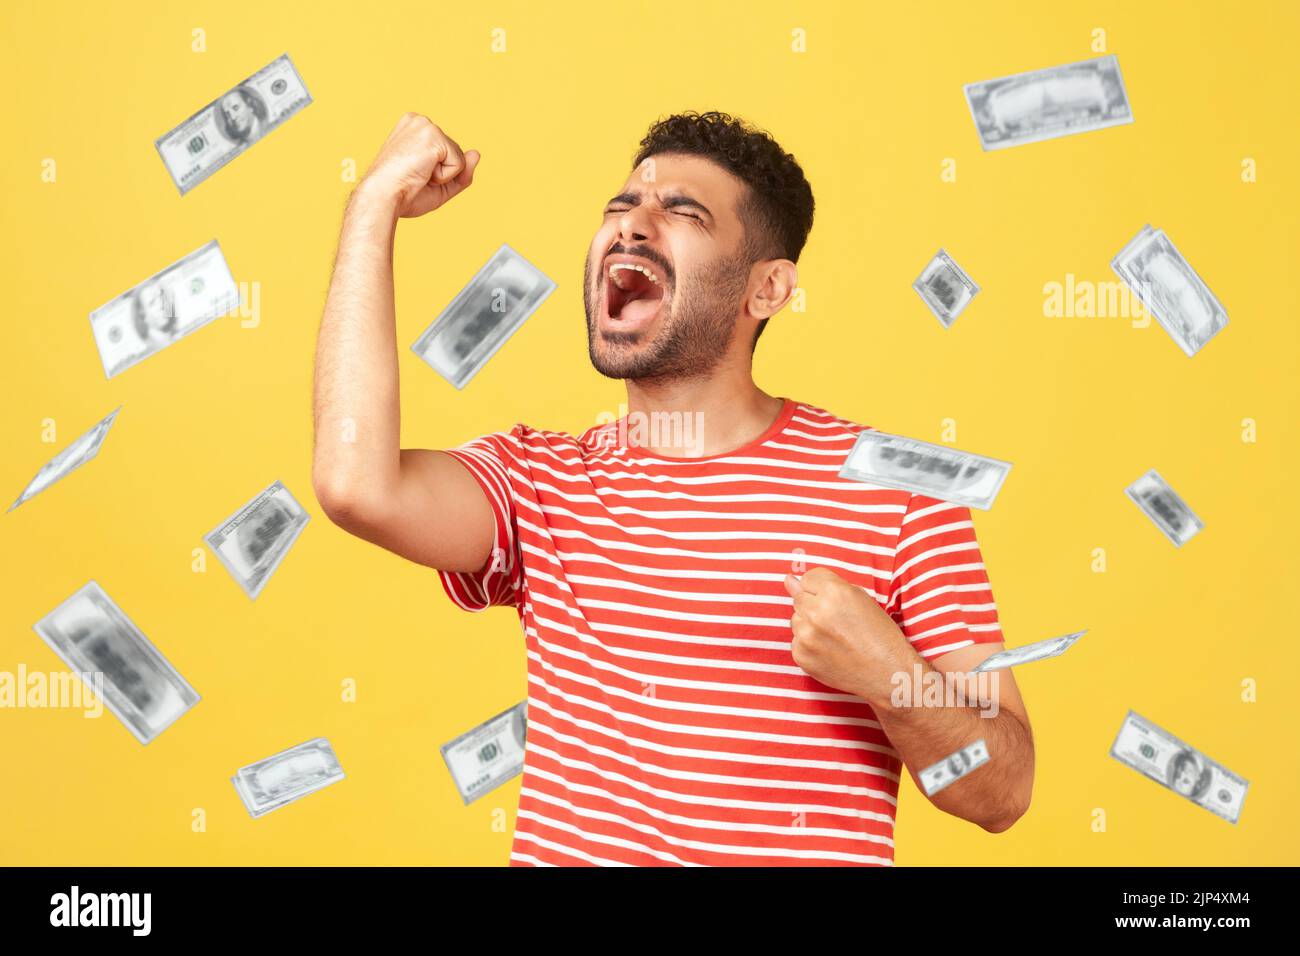 Money rain, winner and rich. Ecstatic happy celebrating motivated man standing with raised fists and shouting for joy, winner excited for success. dollars falling. indoor isolated on yellow background Stock Photo